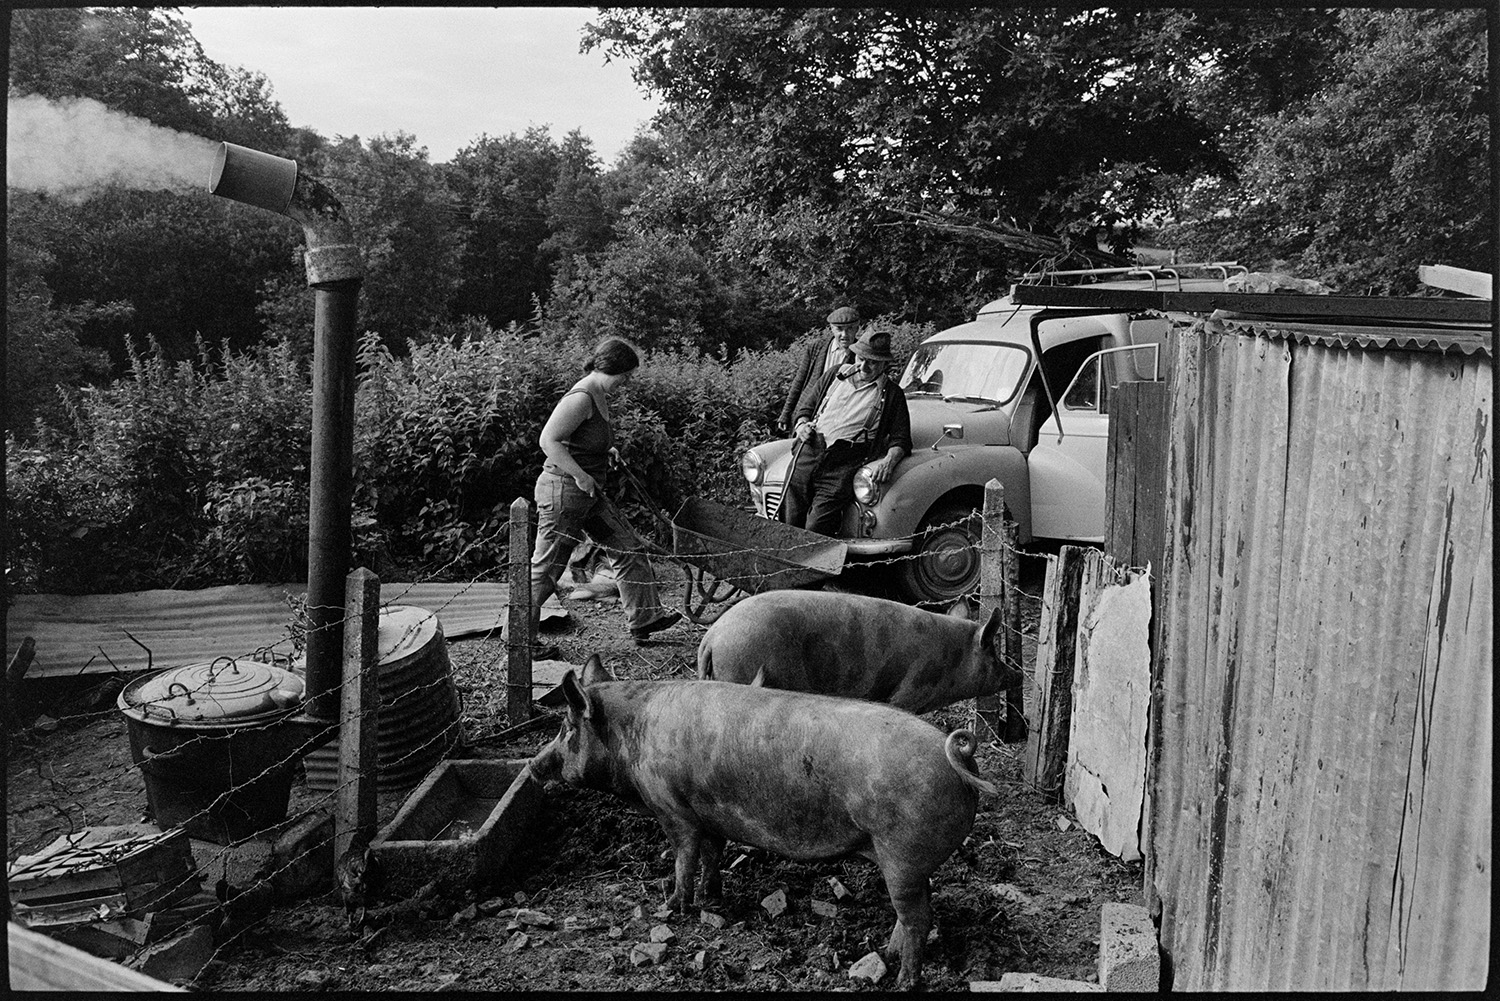 Pig sty and farmer with dogs. 
[Archie Parkhouse and another man leaning on a van parked by a pigsty at Millhams, Dolton. Archie is smoking a pipe. A woman is walking past pushing a wheelbarrow. Two pigs can be seen in the pigsty with a stone trough and a corrugated iron shed.]